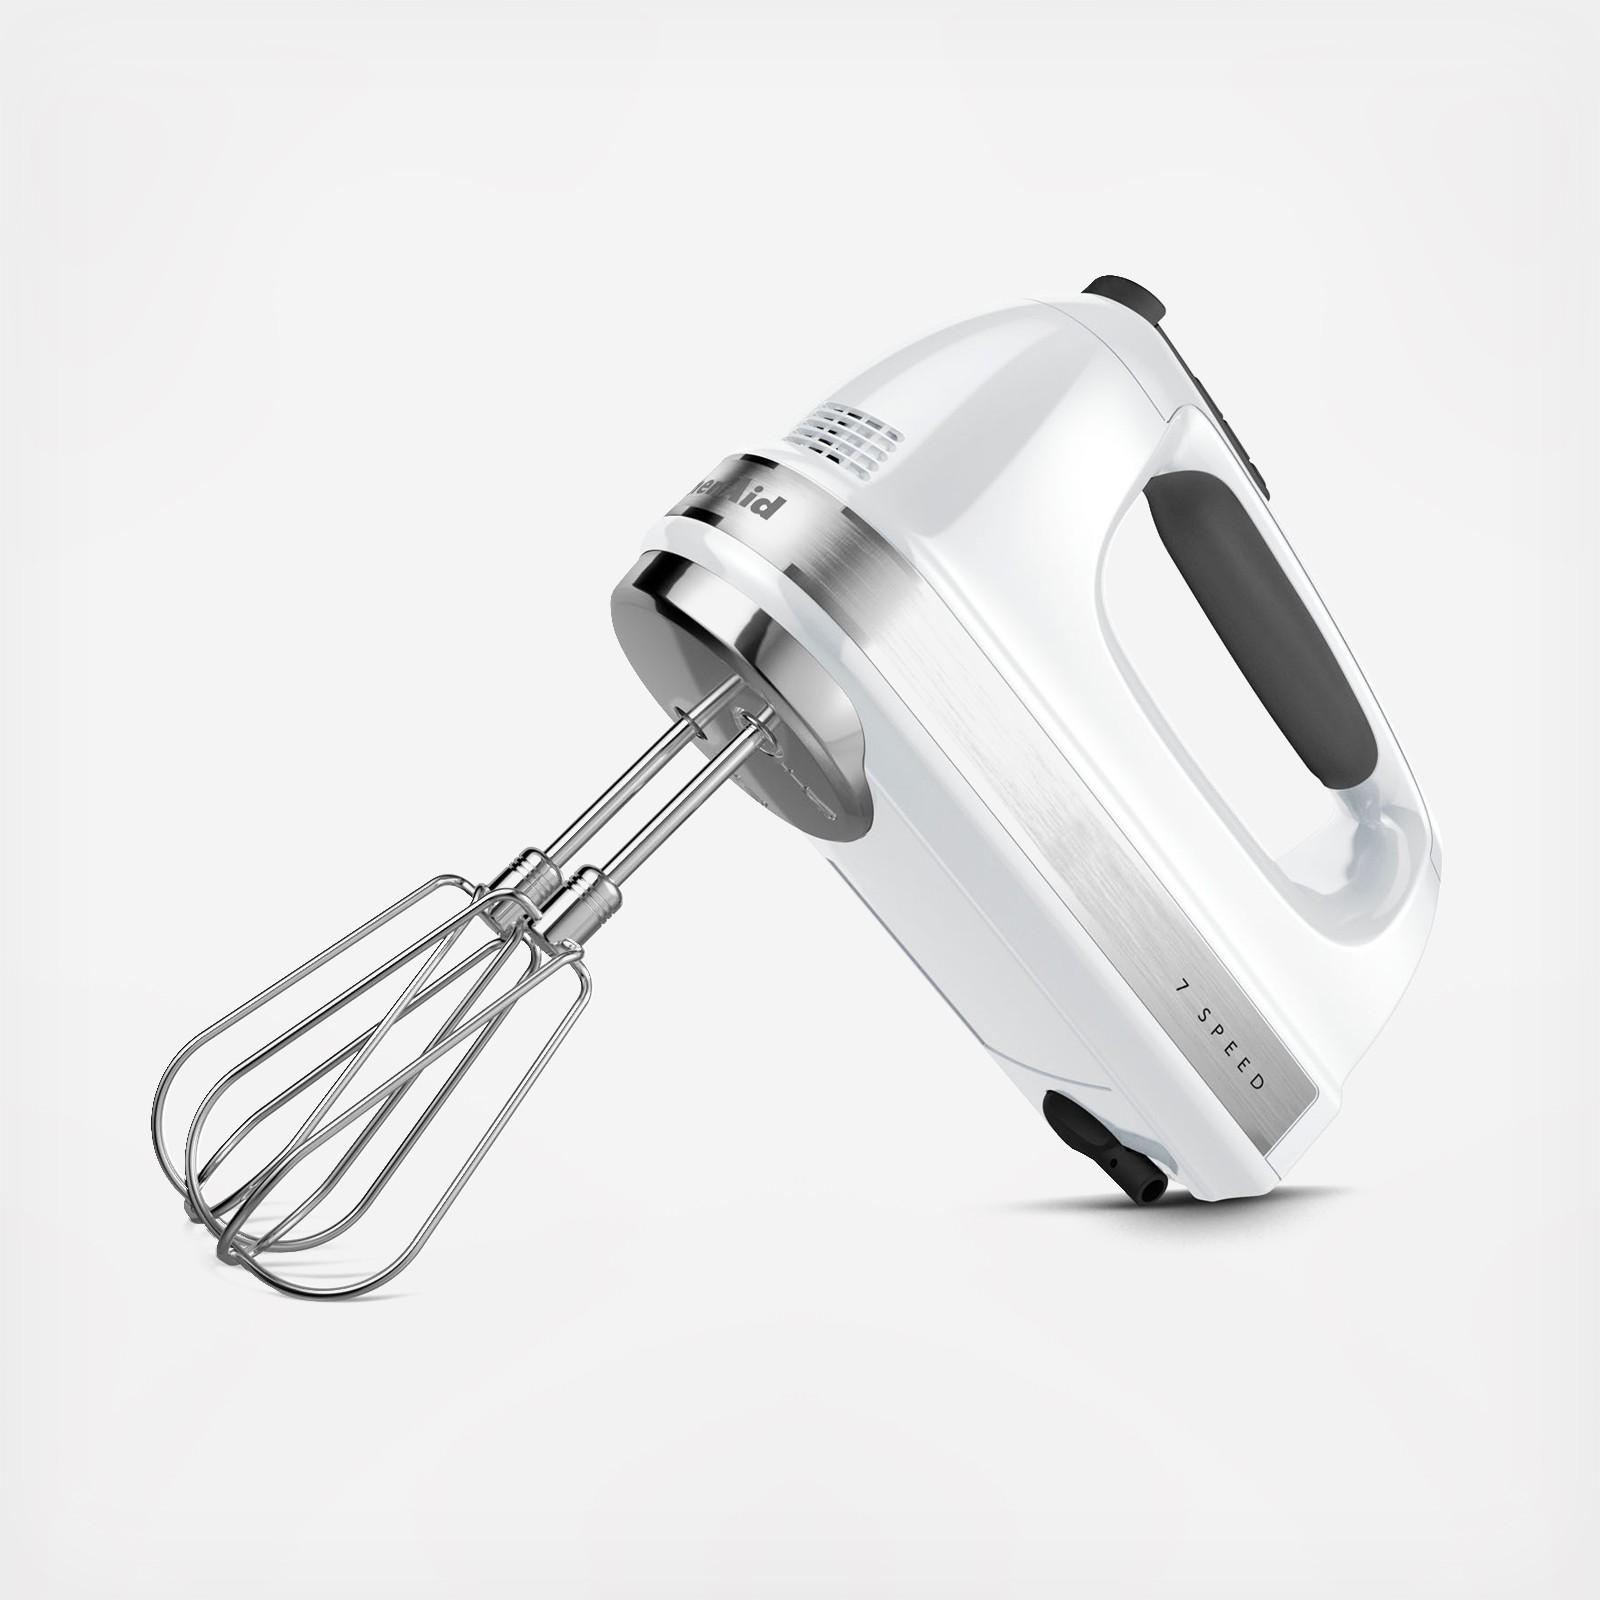 KitchenAid Silver 7-Speed Electric Hand Mixer + Reviews